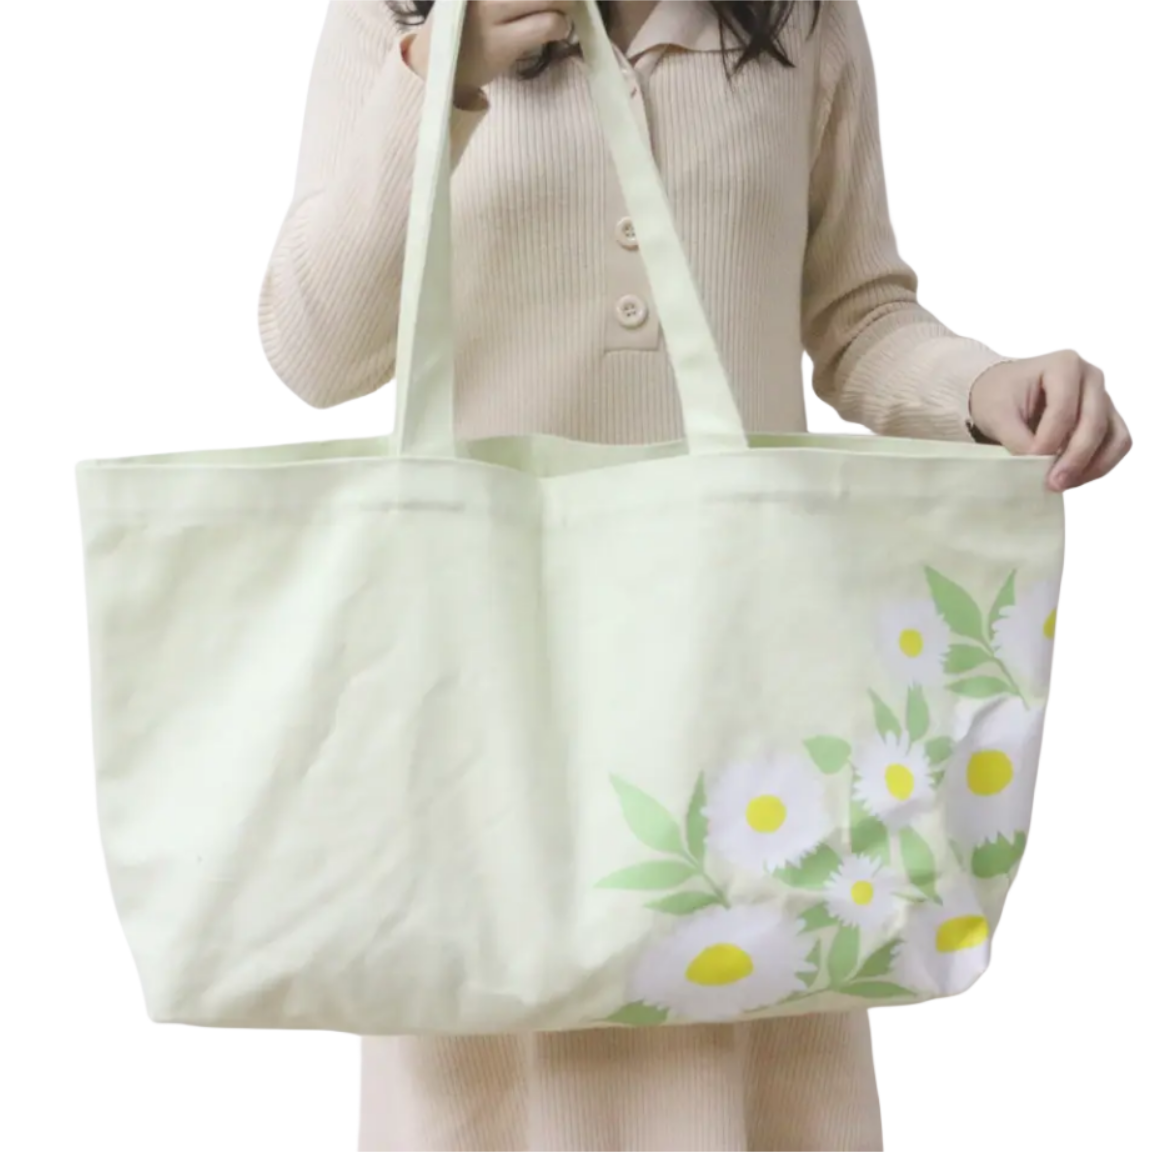 2022  NEW Product Eco-friendly Large Canvas Tote Bag Large Capacity Floral Pattern Recycled Green Cotton Grocery Shopping Bag